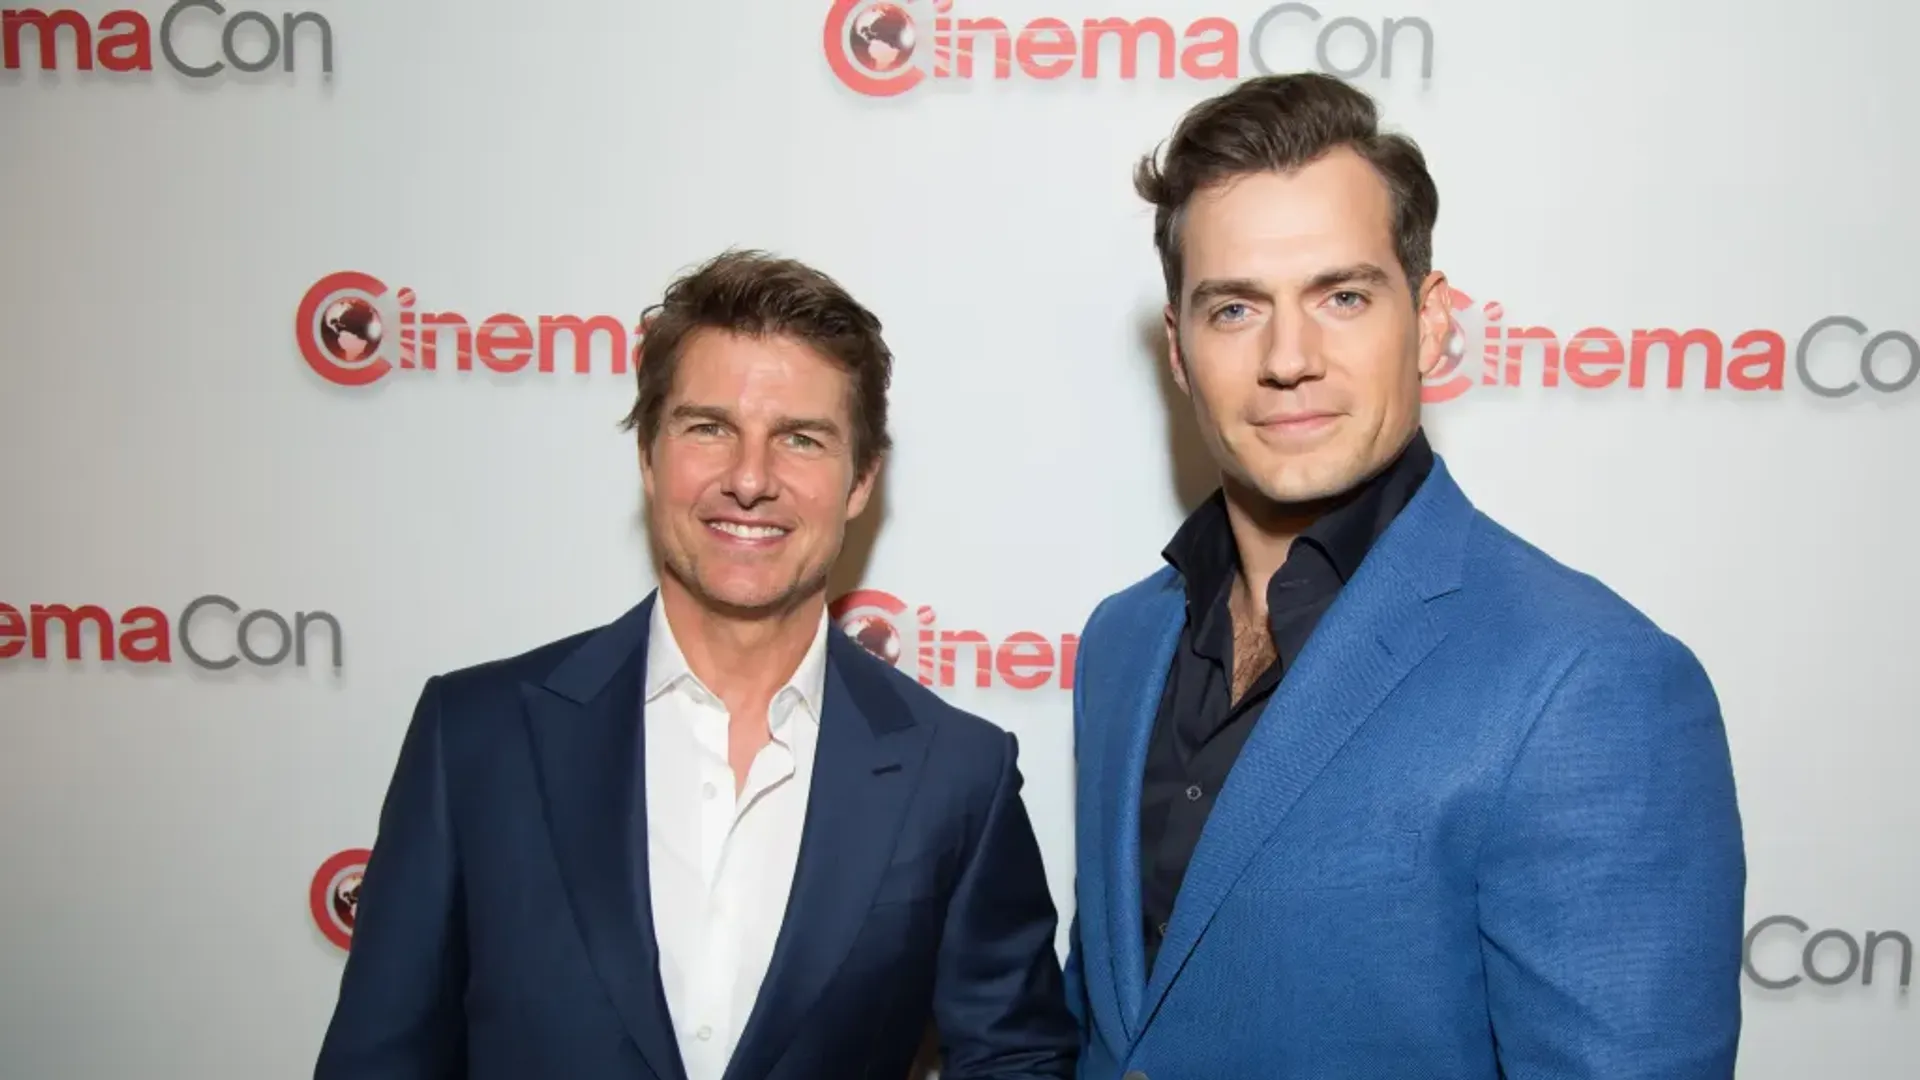 Tom Cruise and Henry Cavill